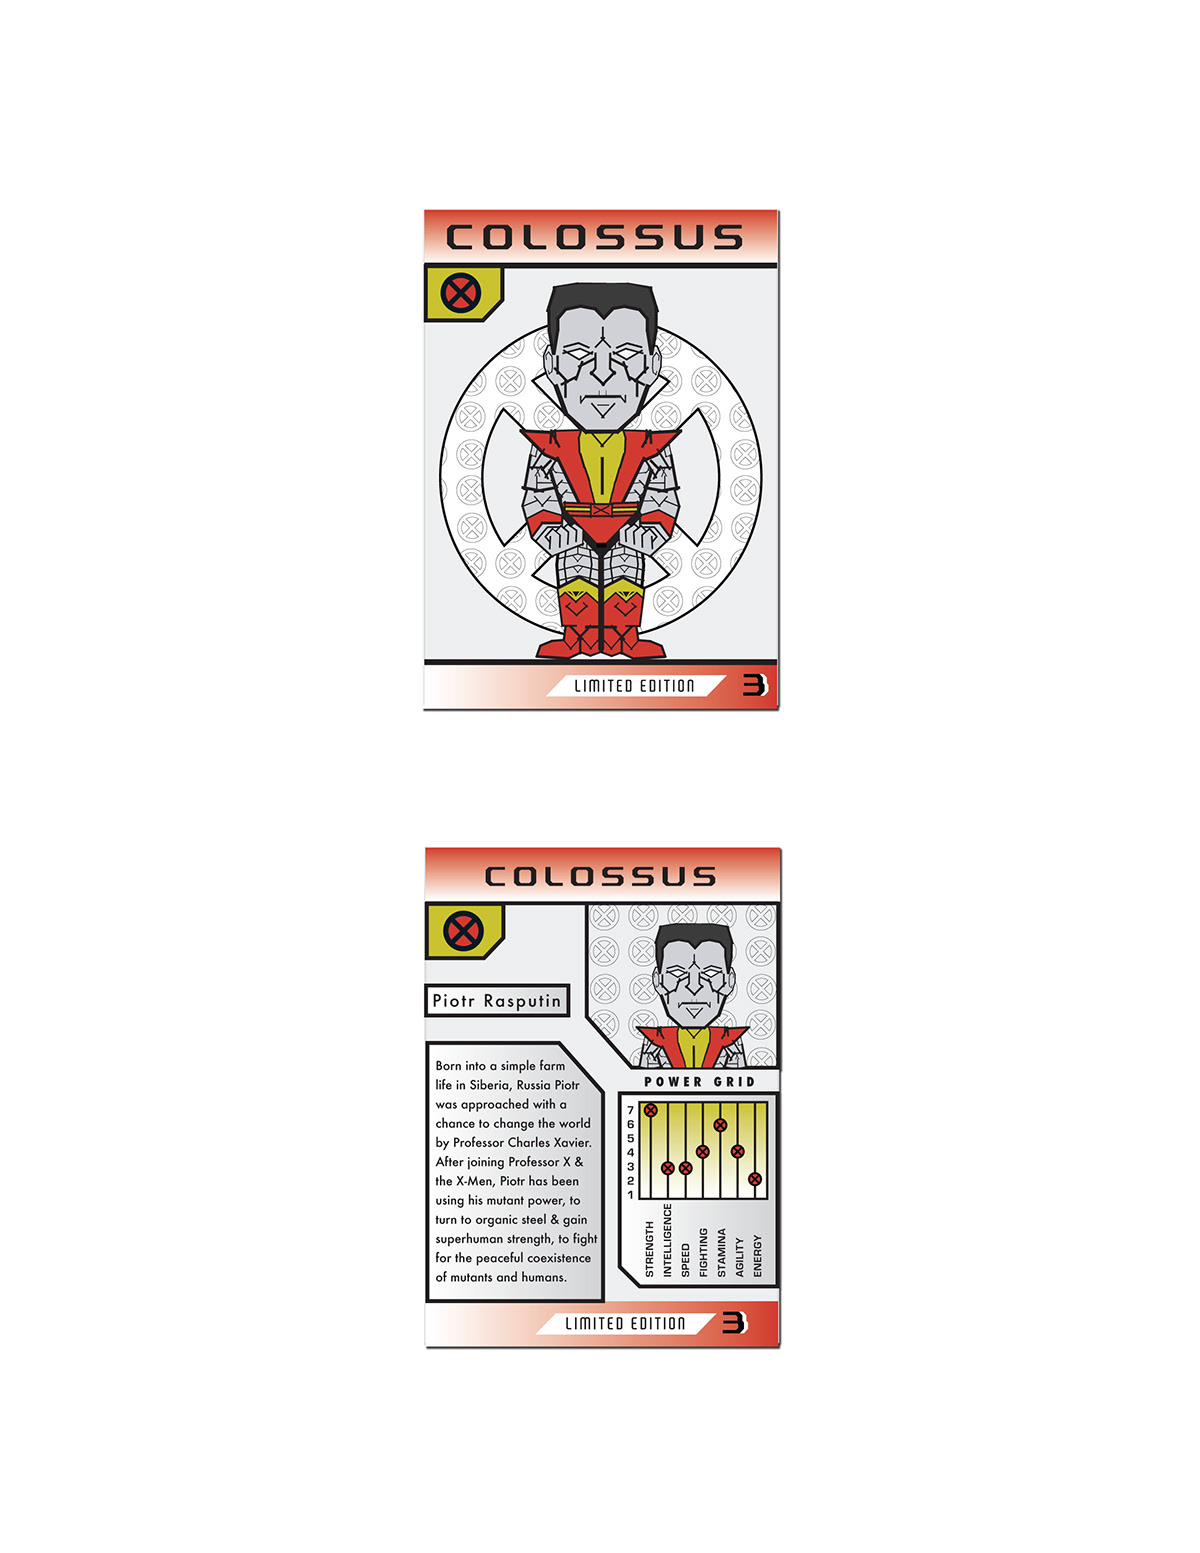 x-men characters wolverine cyclops colossus magneto trading cards